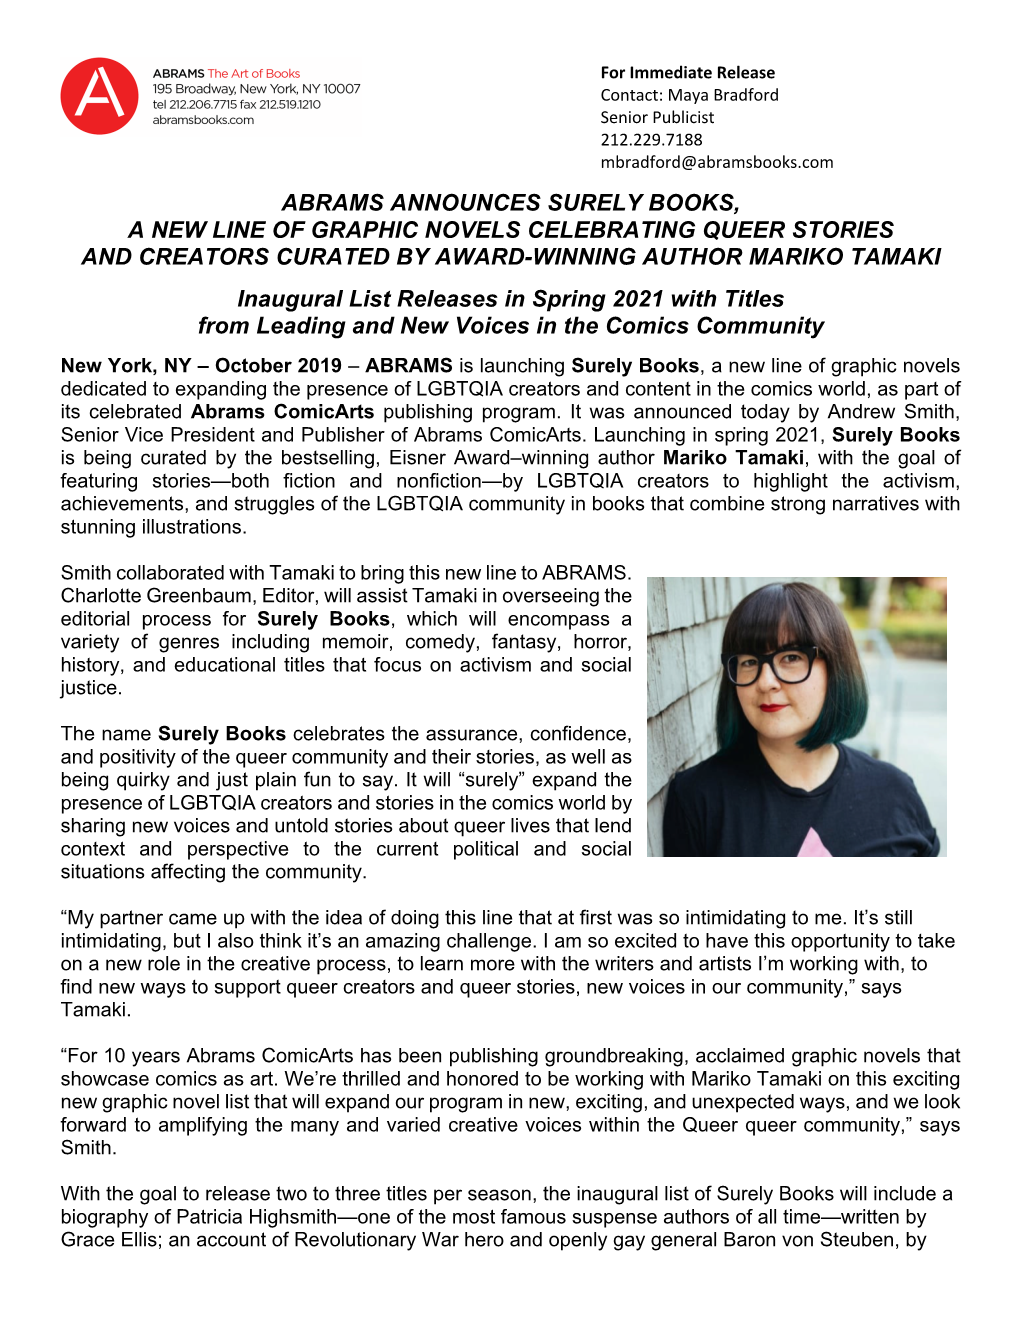 Abrams Announces Surely Books, a New Line of Graphic Novels Celebrating Queer Stories and Creators Curated by Award-Winning Author Mariko Tamaki